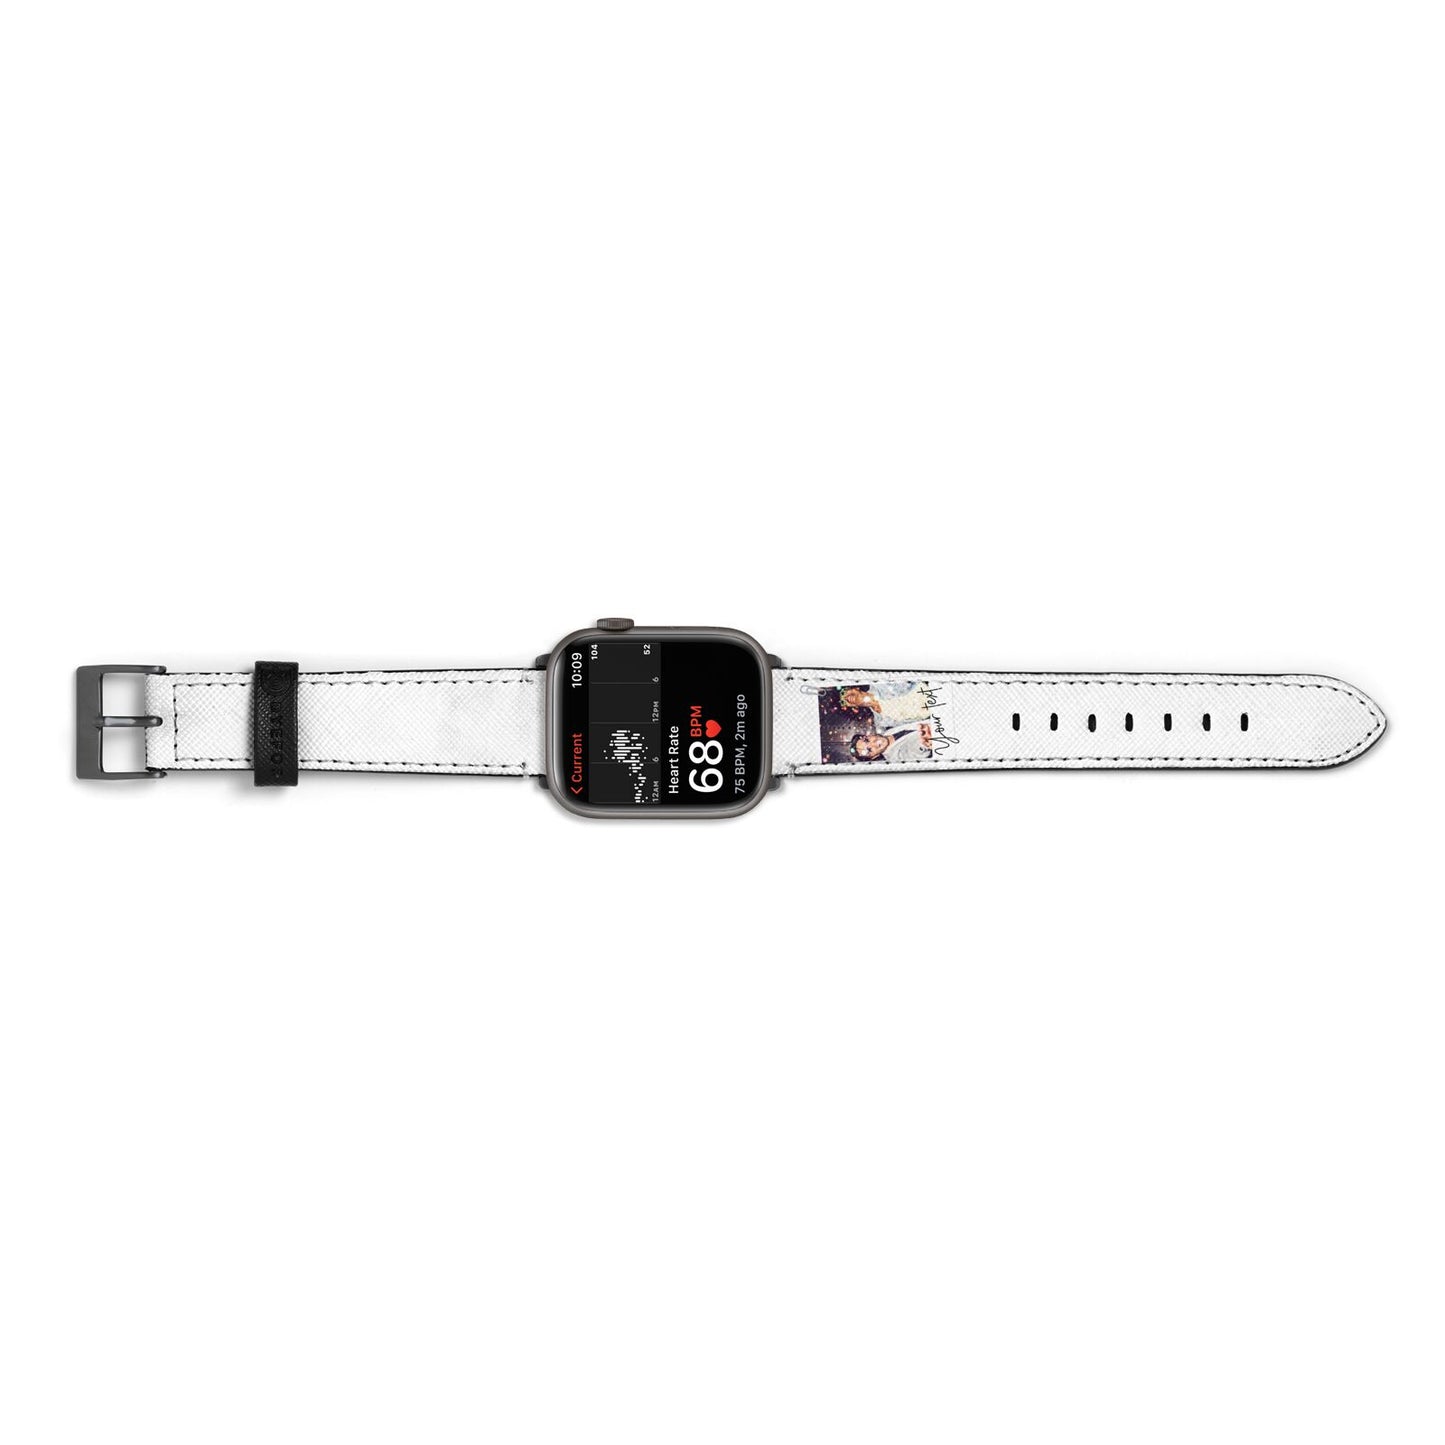 Personalised Photo with Text Apple Watch Strap Size 38mm Landscape Image Space Grey Hardware